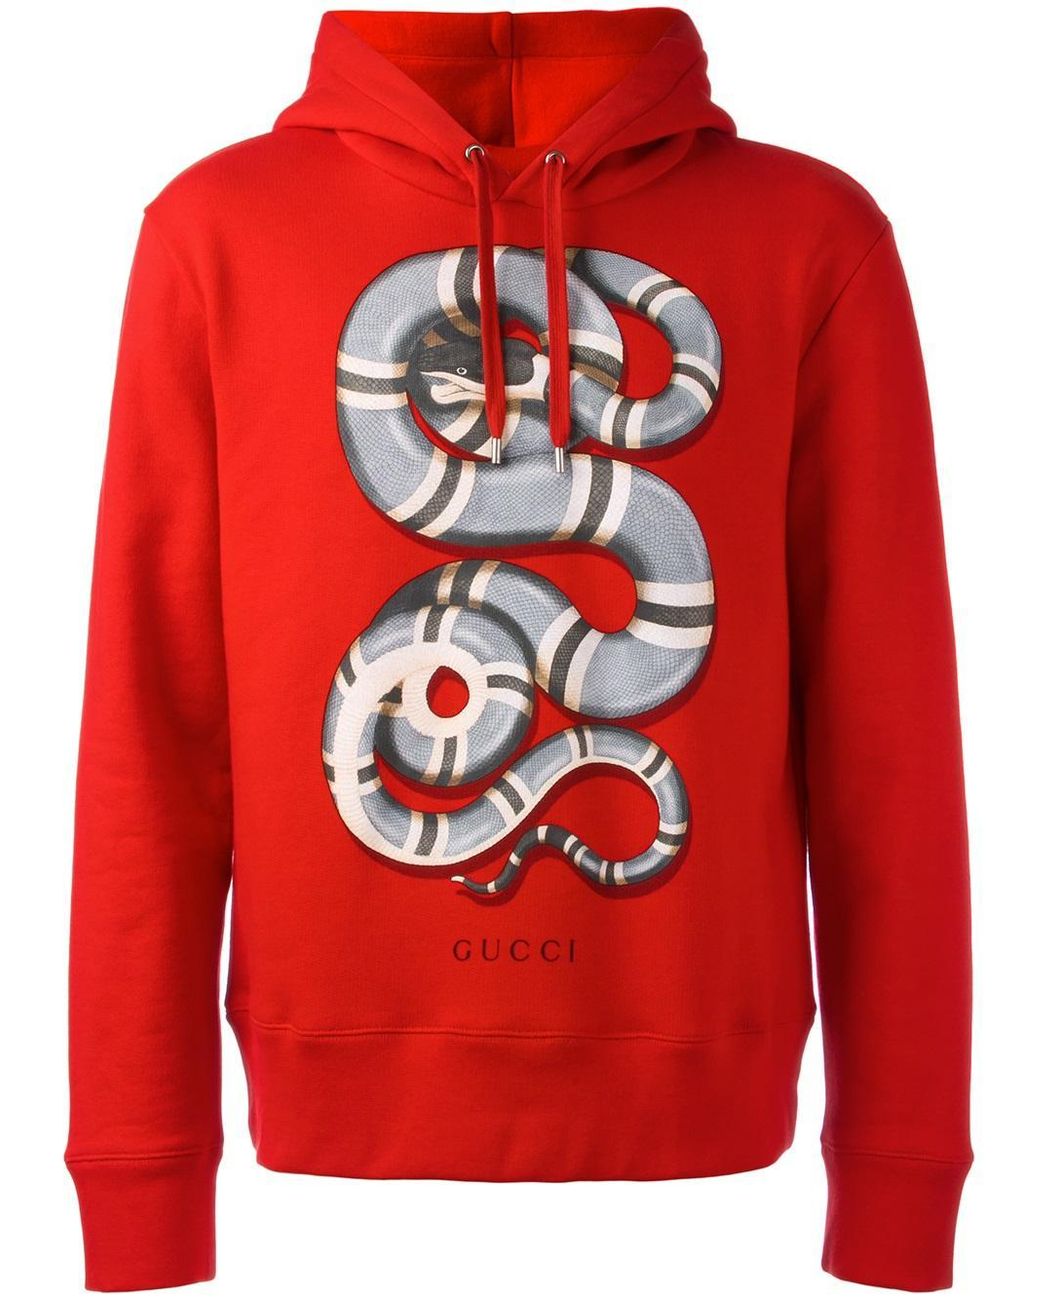 Gucci Snake Print Hoodie in Red for Men